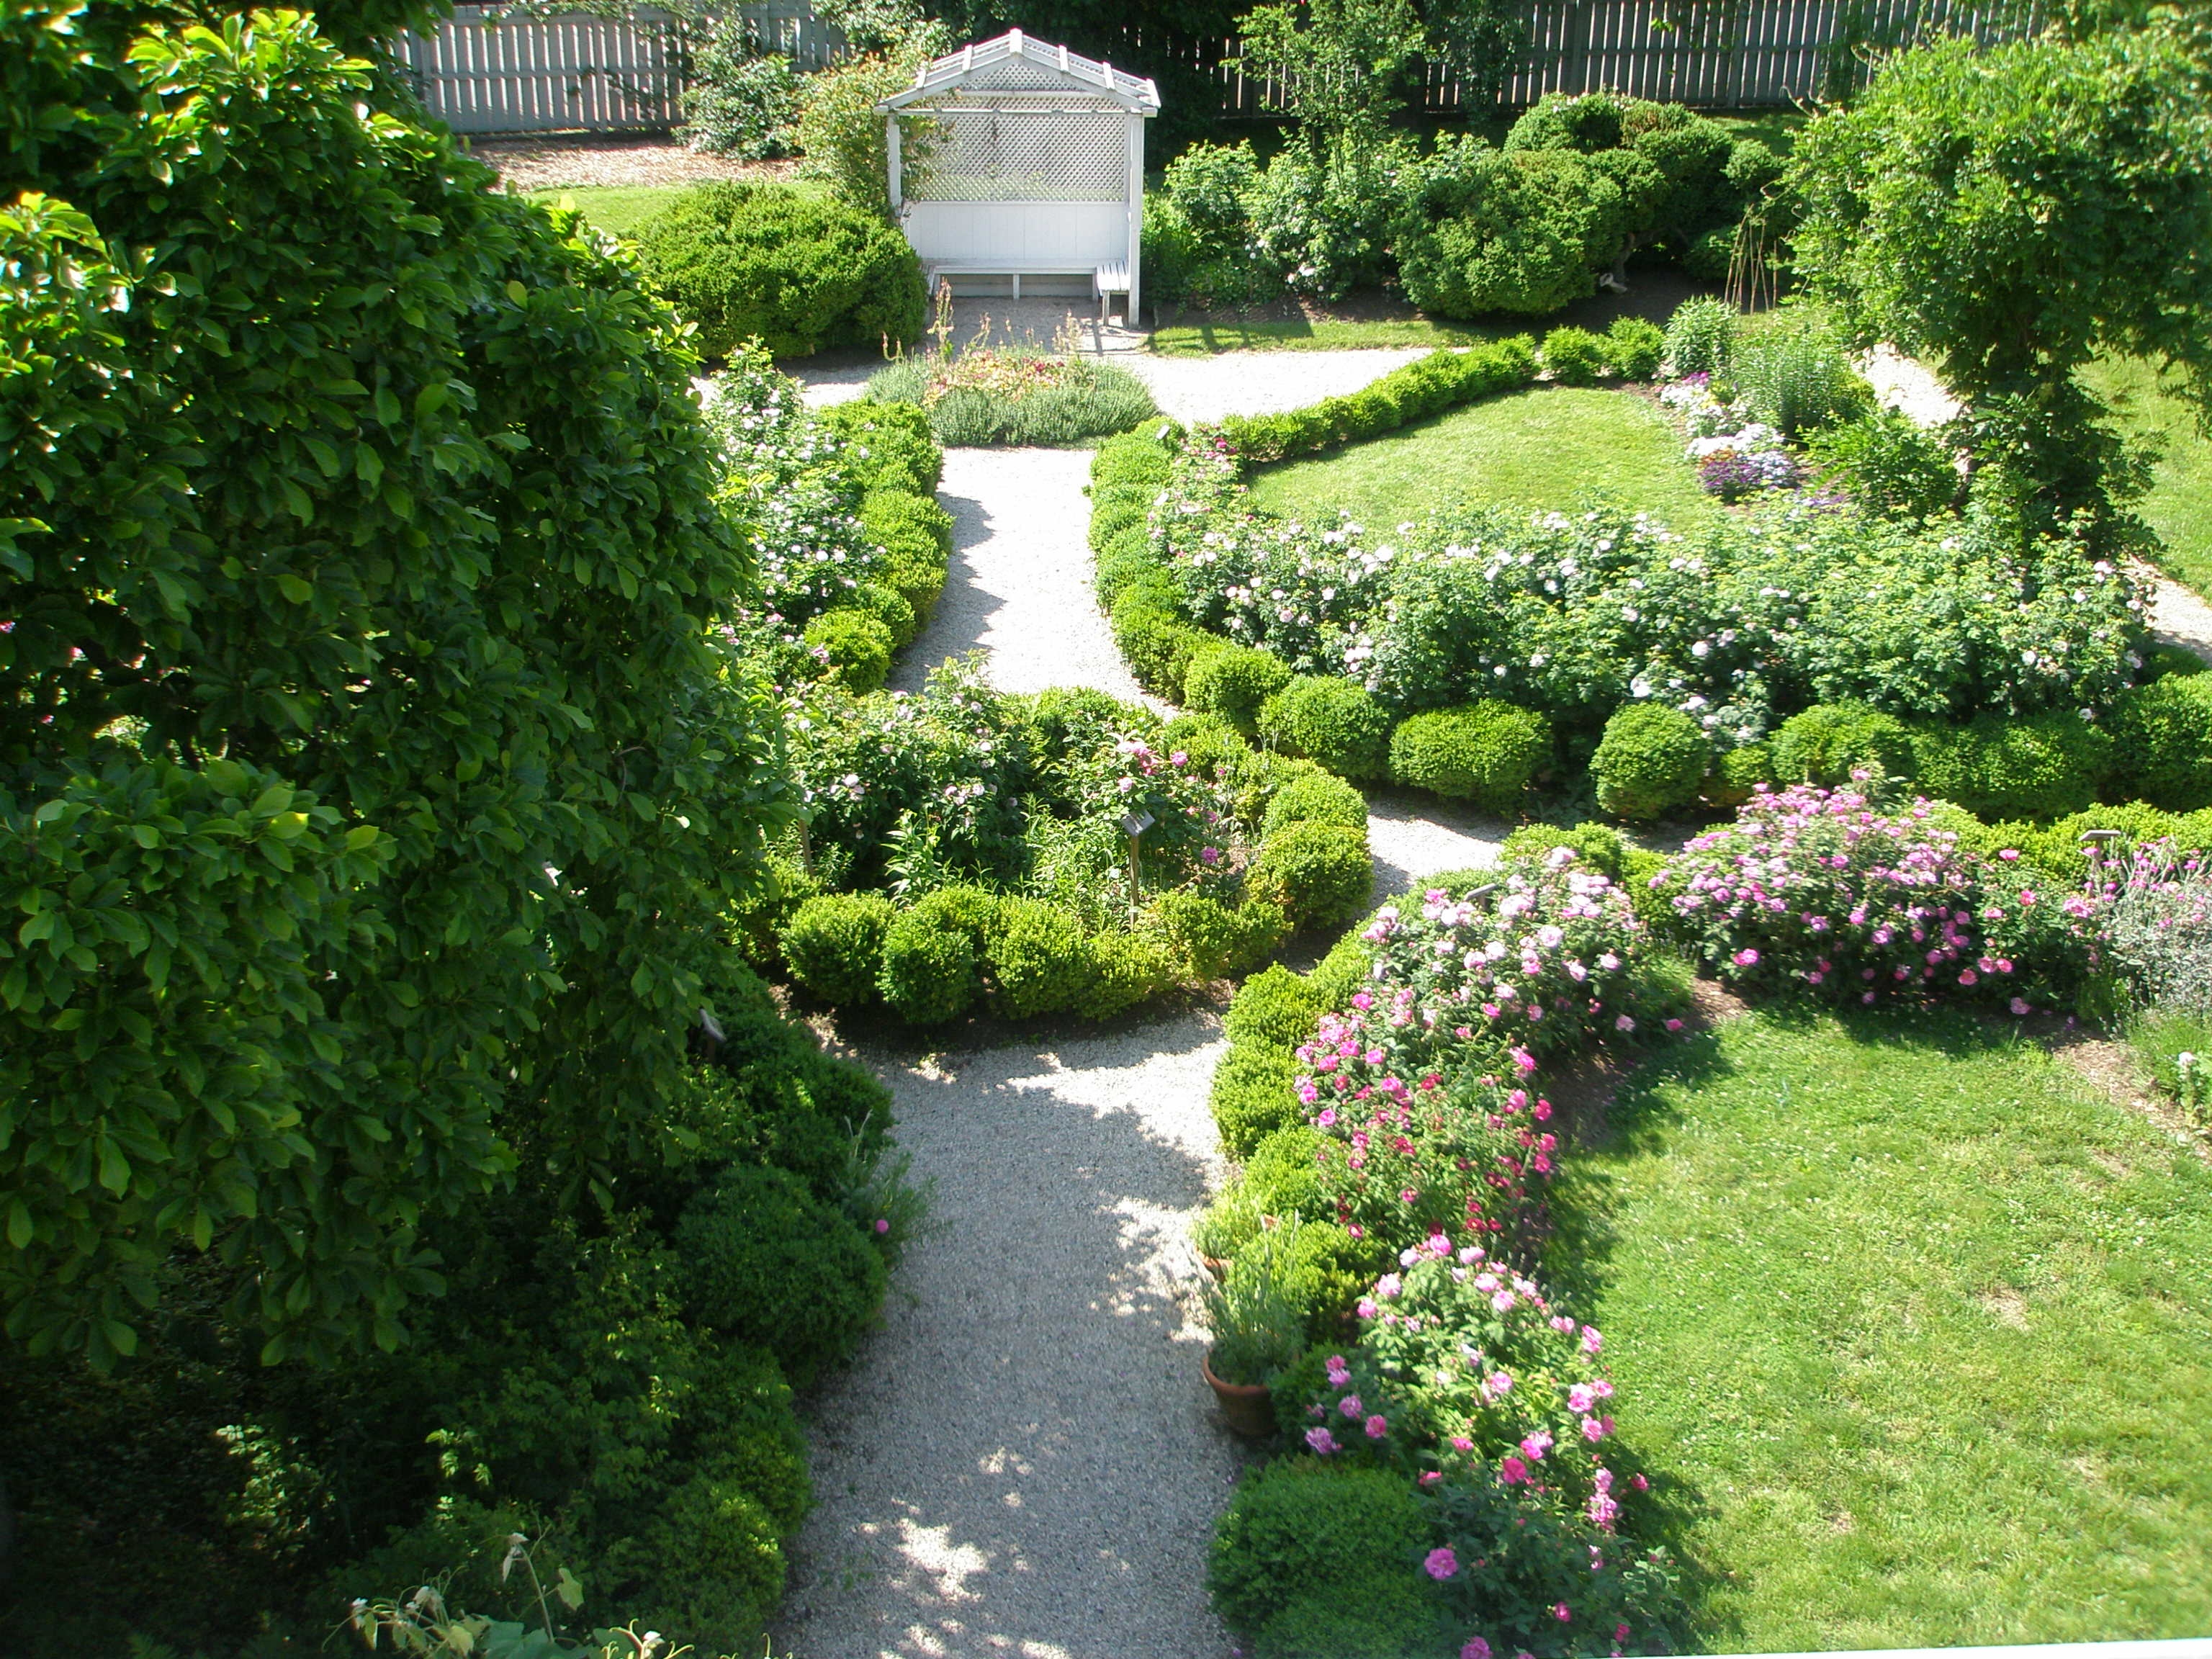 A view of the Wyck House Historical Gardens. (credit: Lauren Lipton)